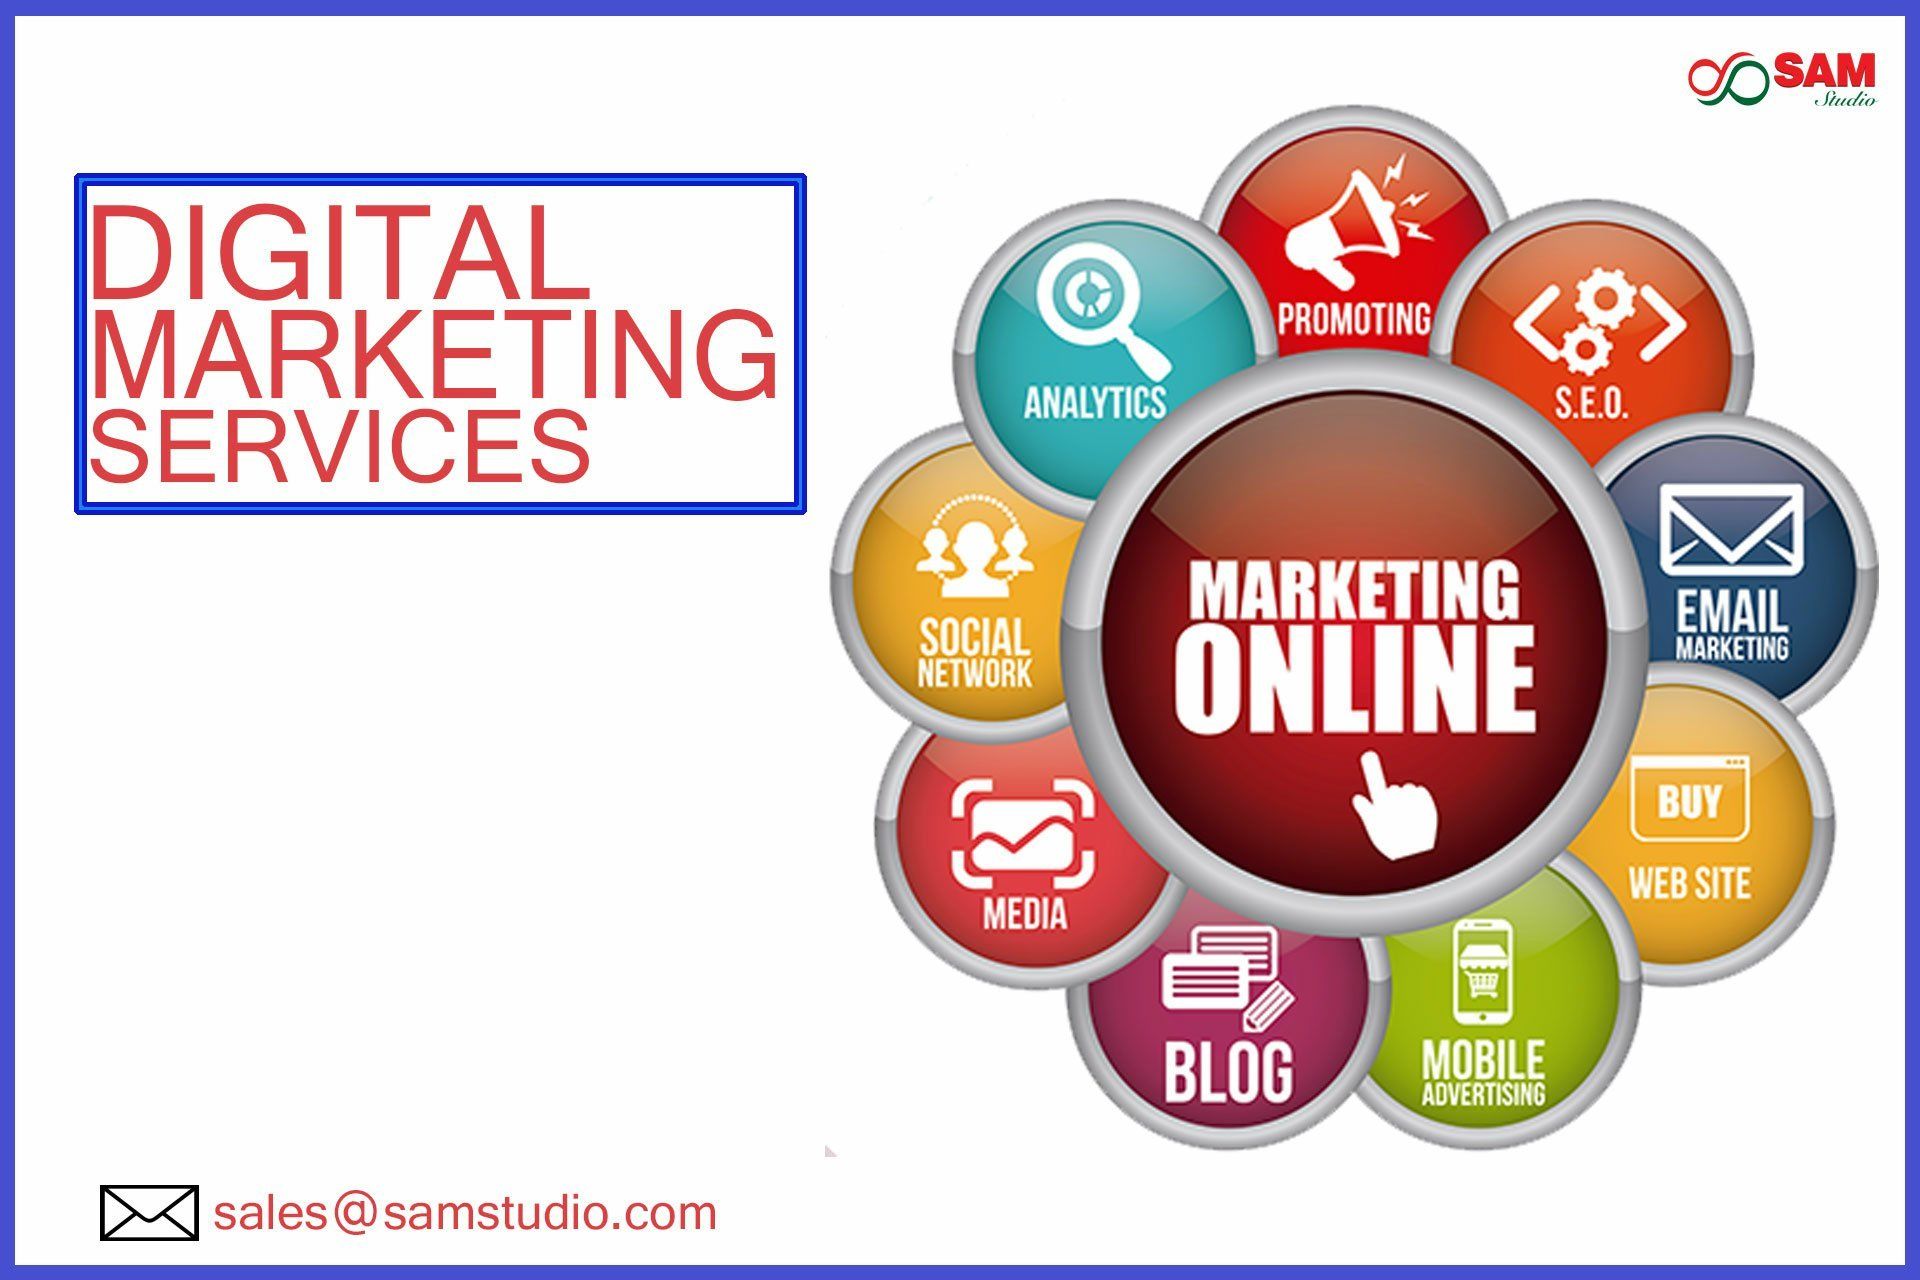 What Are the Benefits of Internet Marketing?